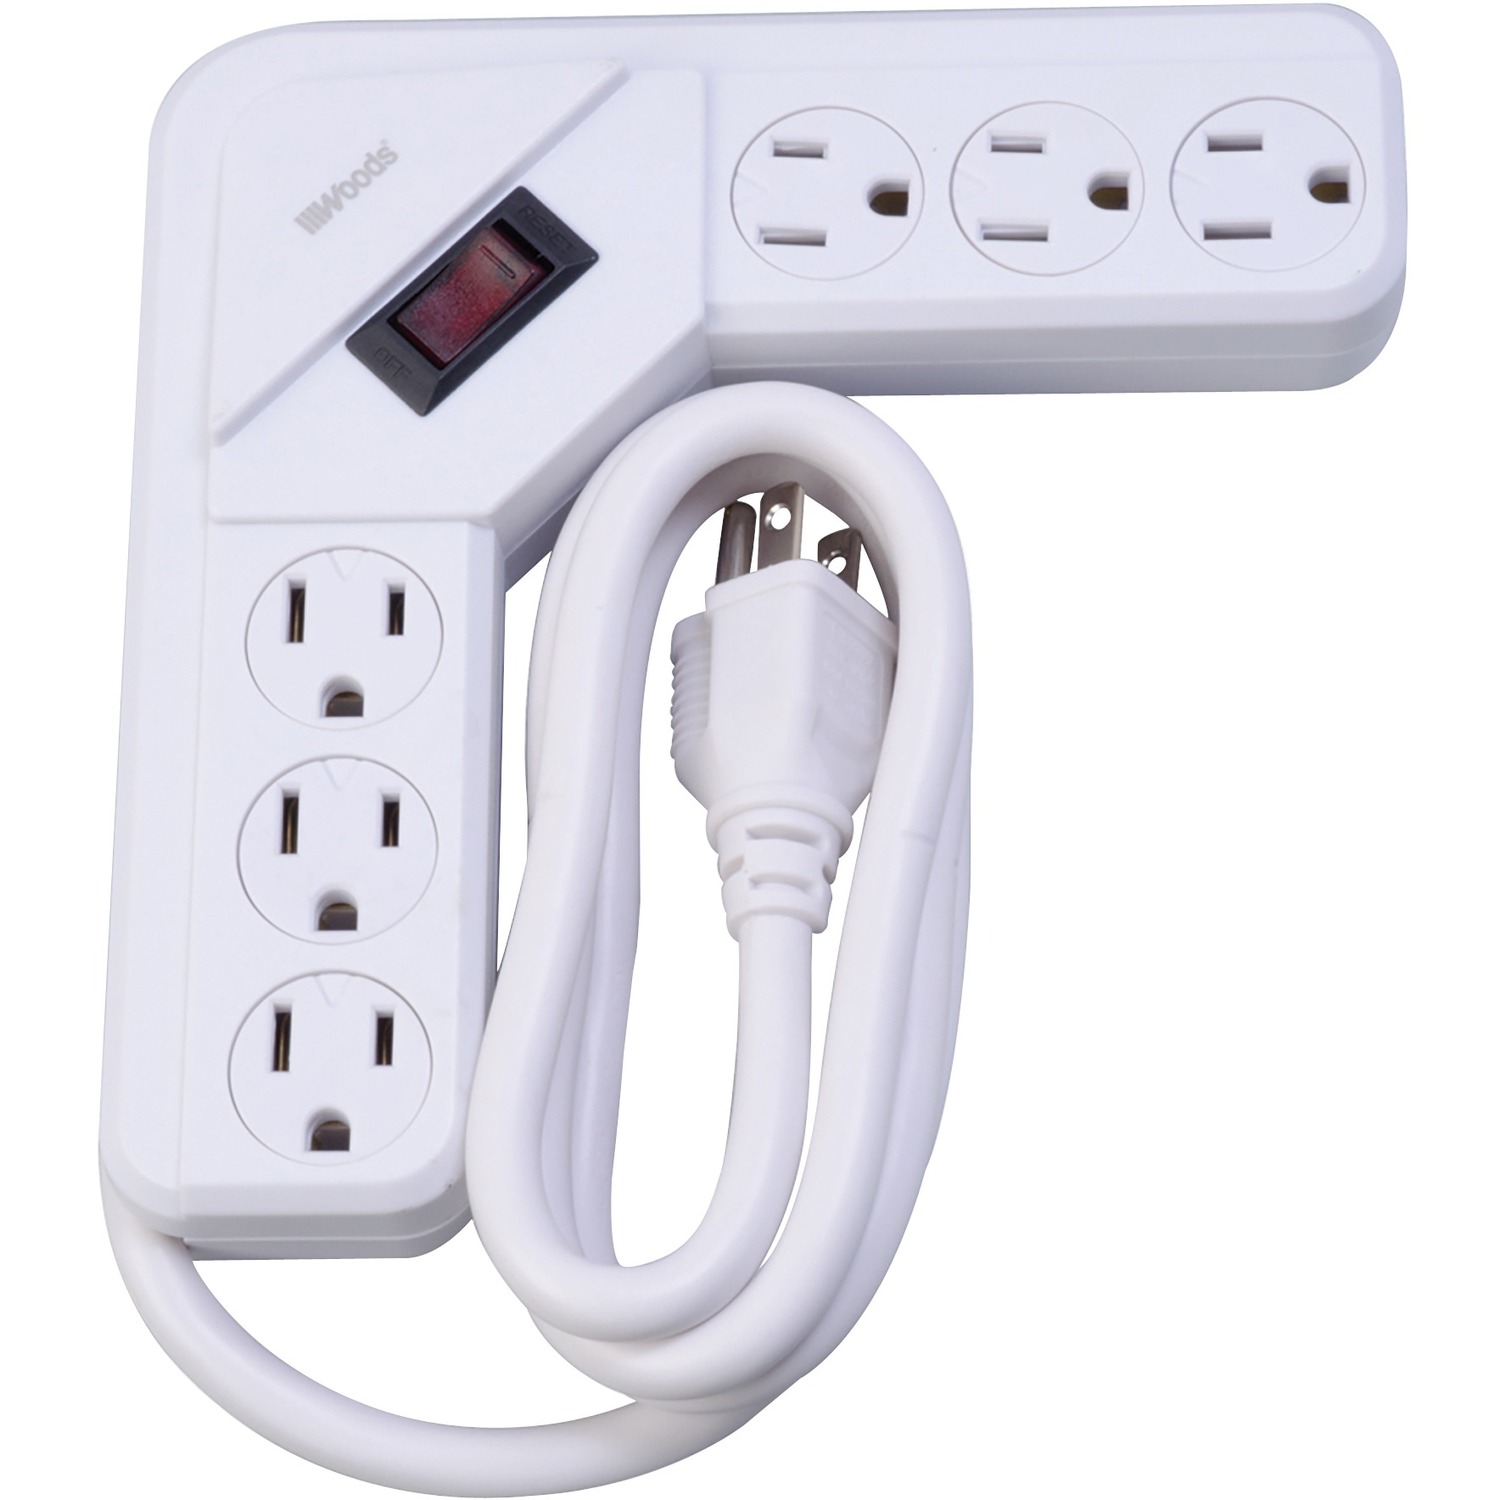 Power Cords & Surge Protection